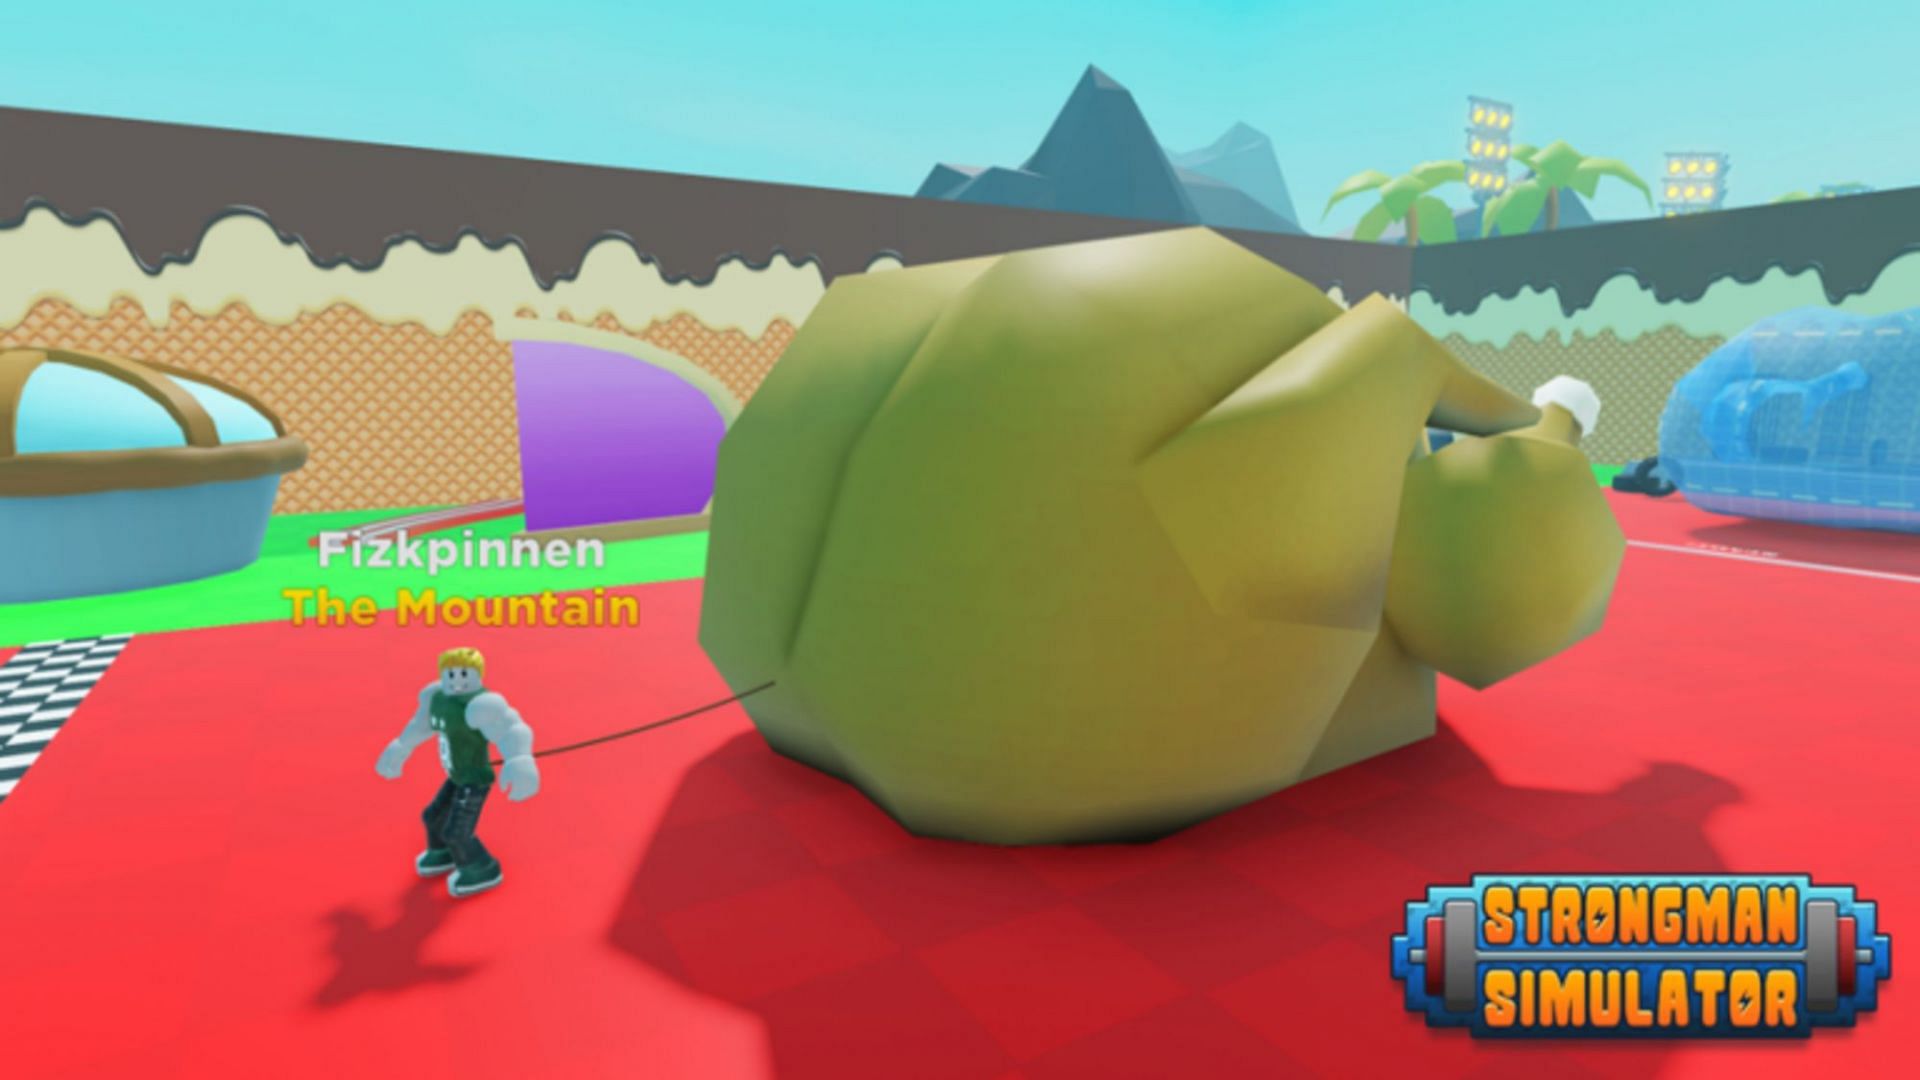 Workout and get stronger (Image via Roblox)